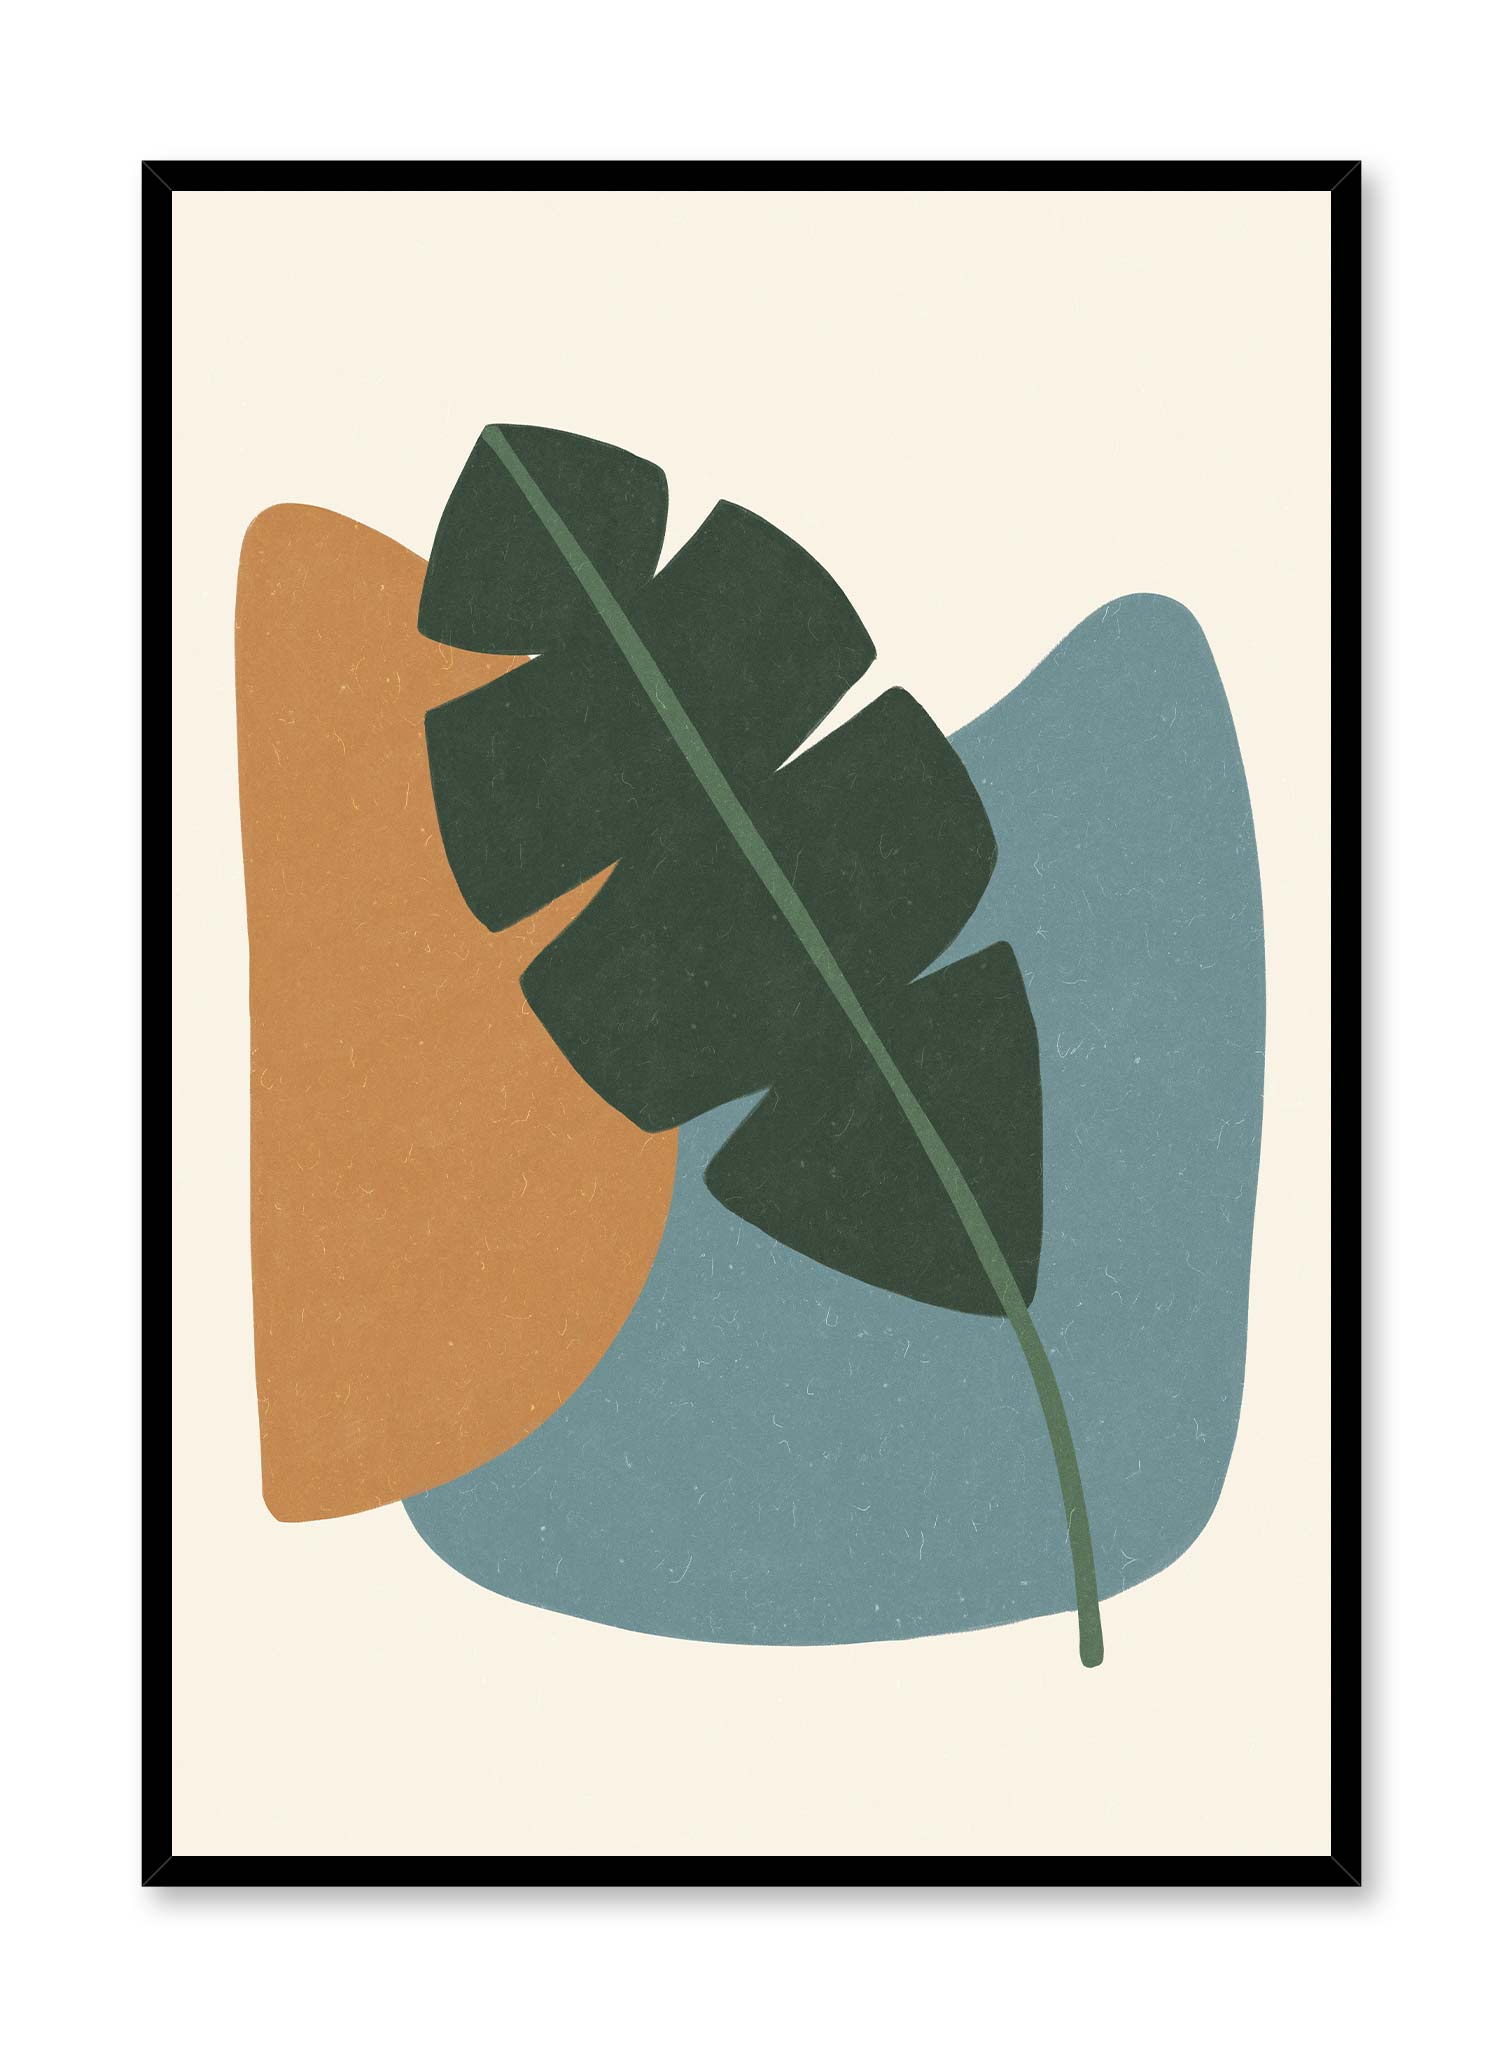 Banana Leaf is a minimalist a green banana leaf placed on top of an orange and teal circular shapes by Opposite Wall.